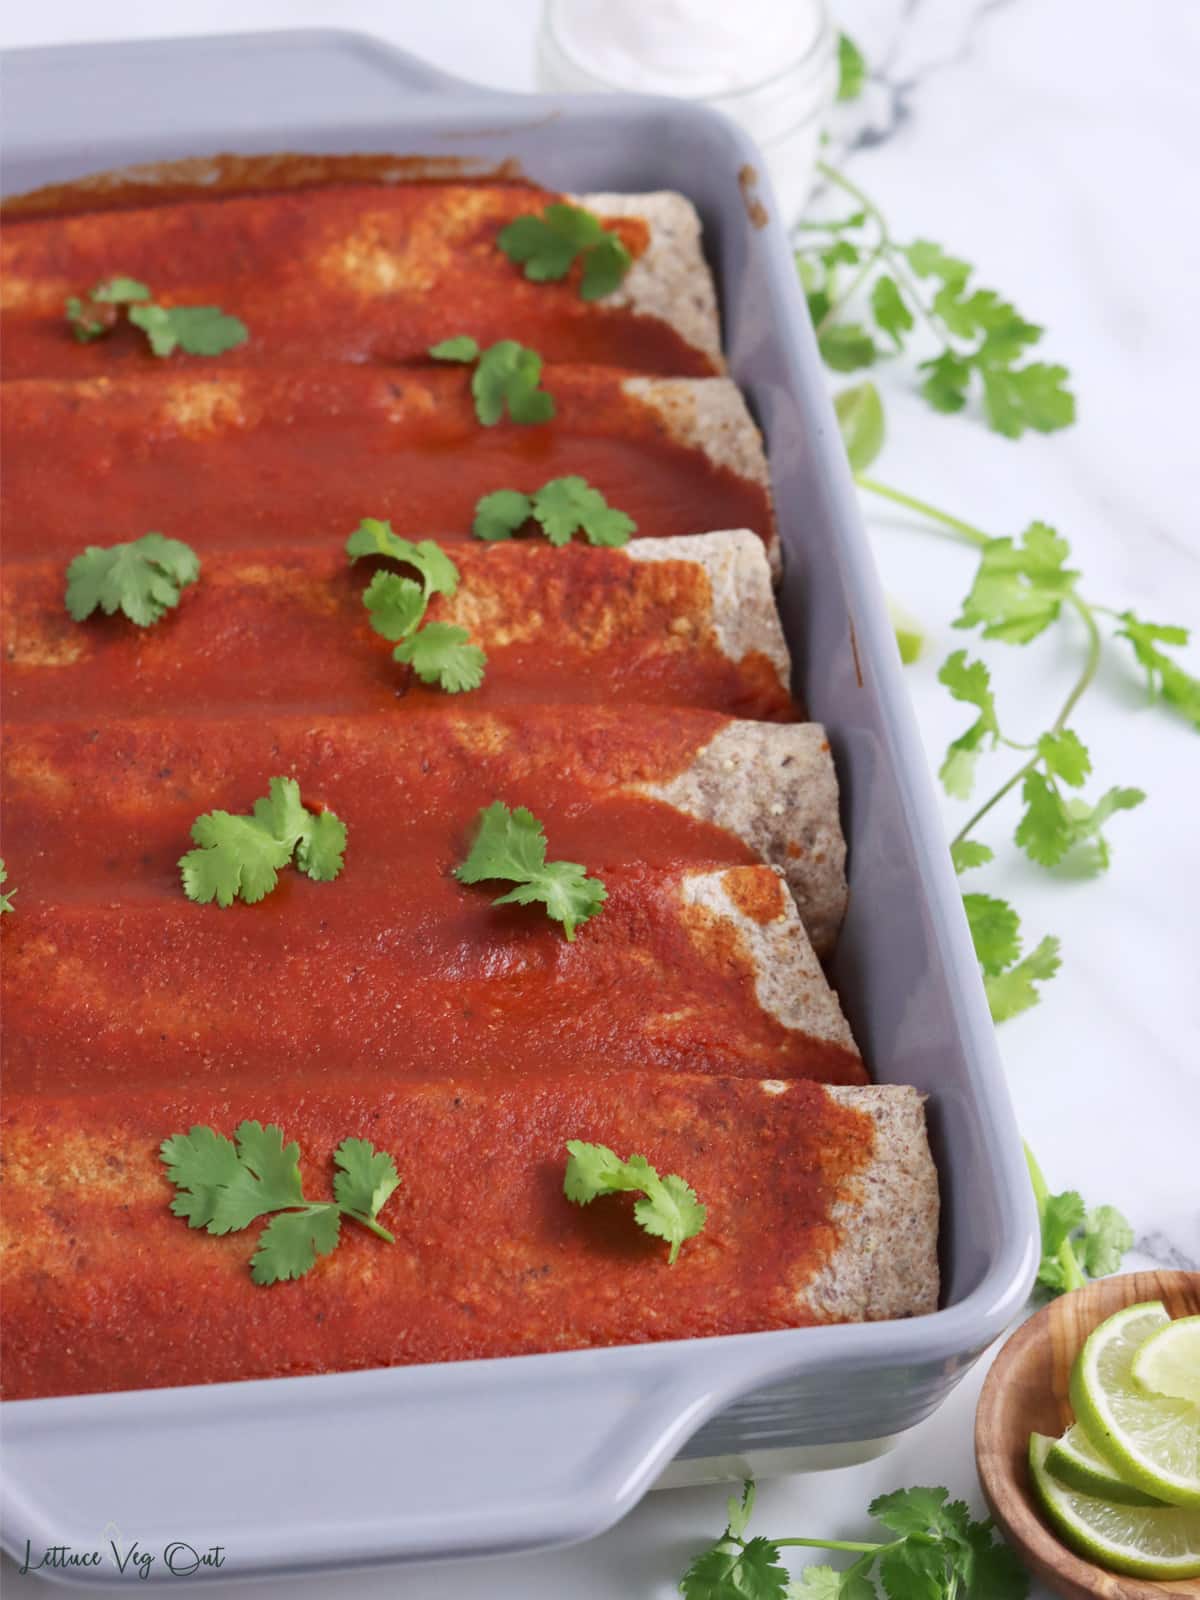 Casserole dish filled with baked enchiladas, topped with red sauce and cilantro garnish.